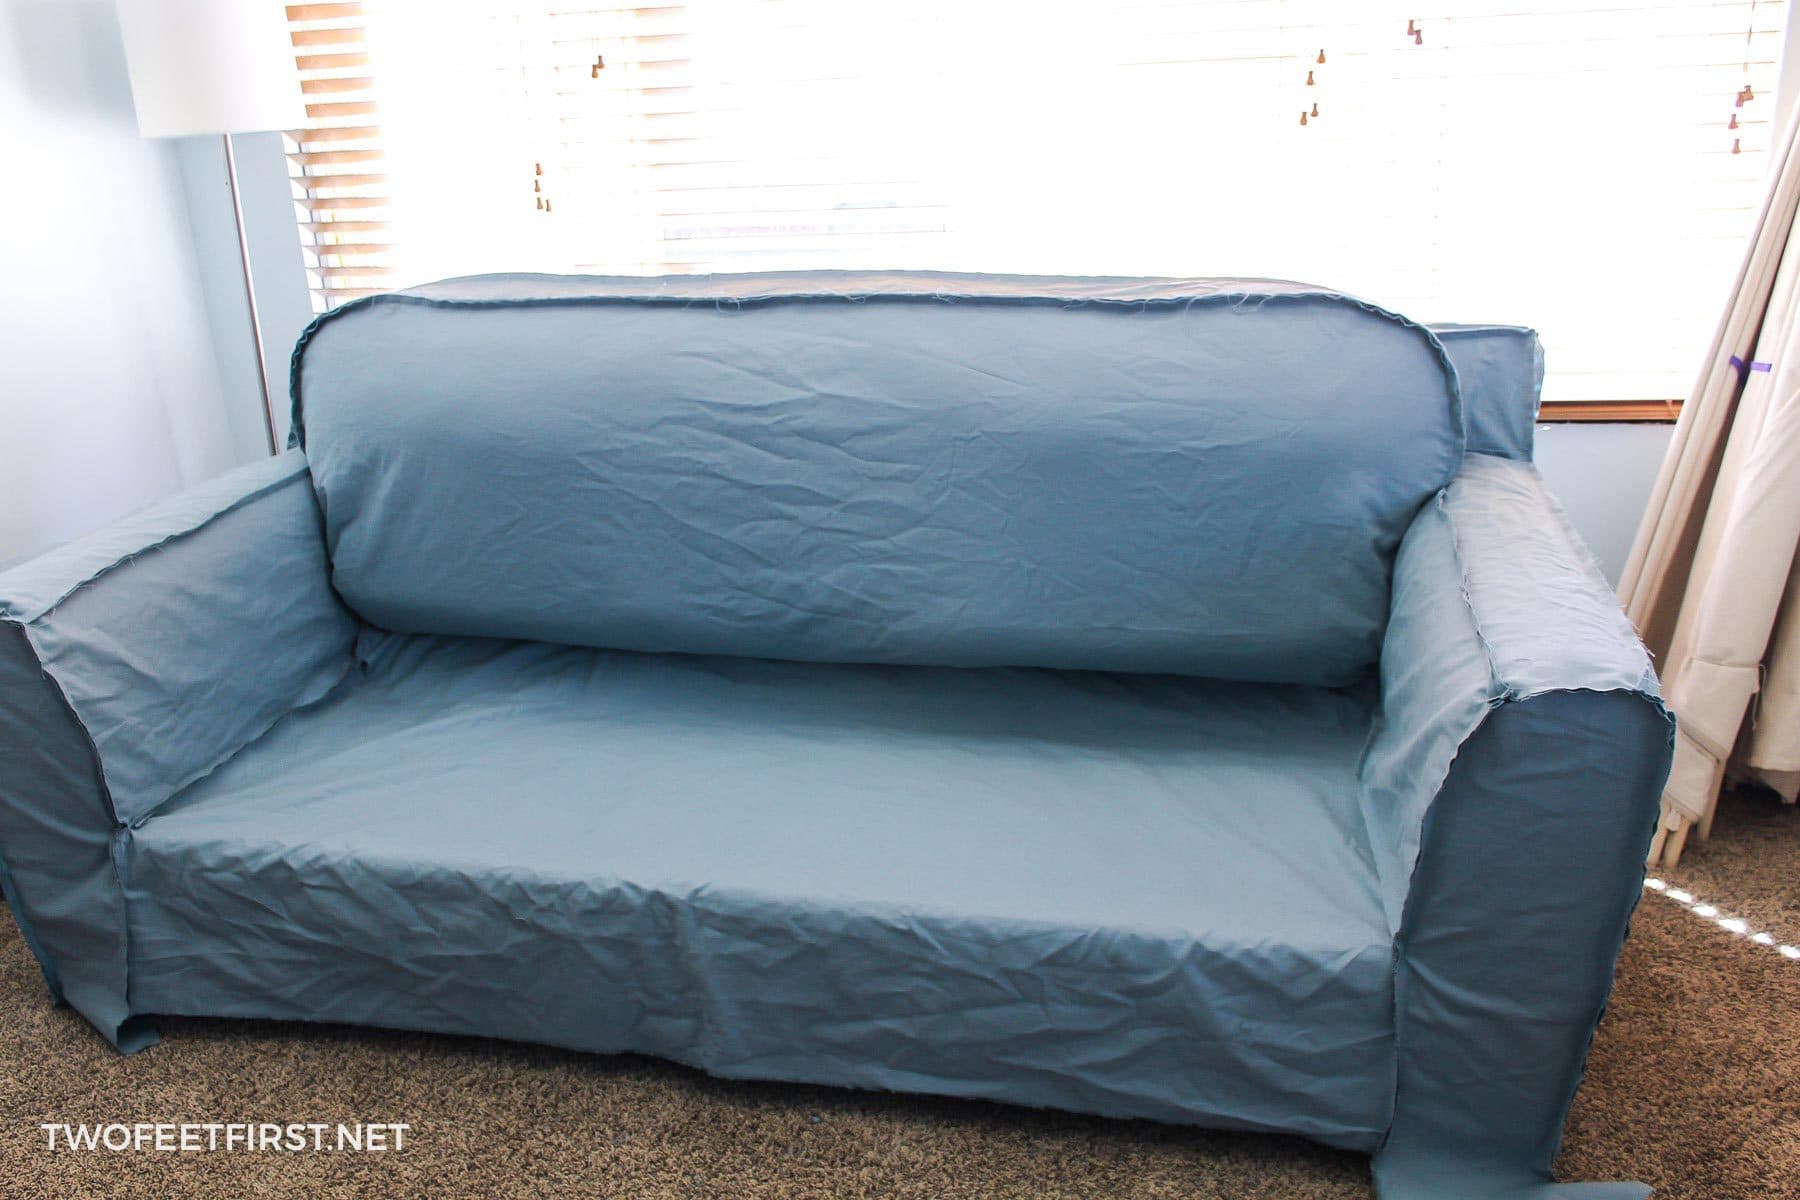 Make Slipcover For A Sofa Diy Couch Cover, How To Make A Sofa Cover Pattern